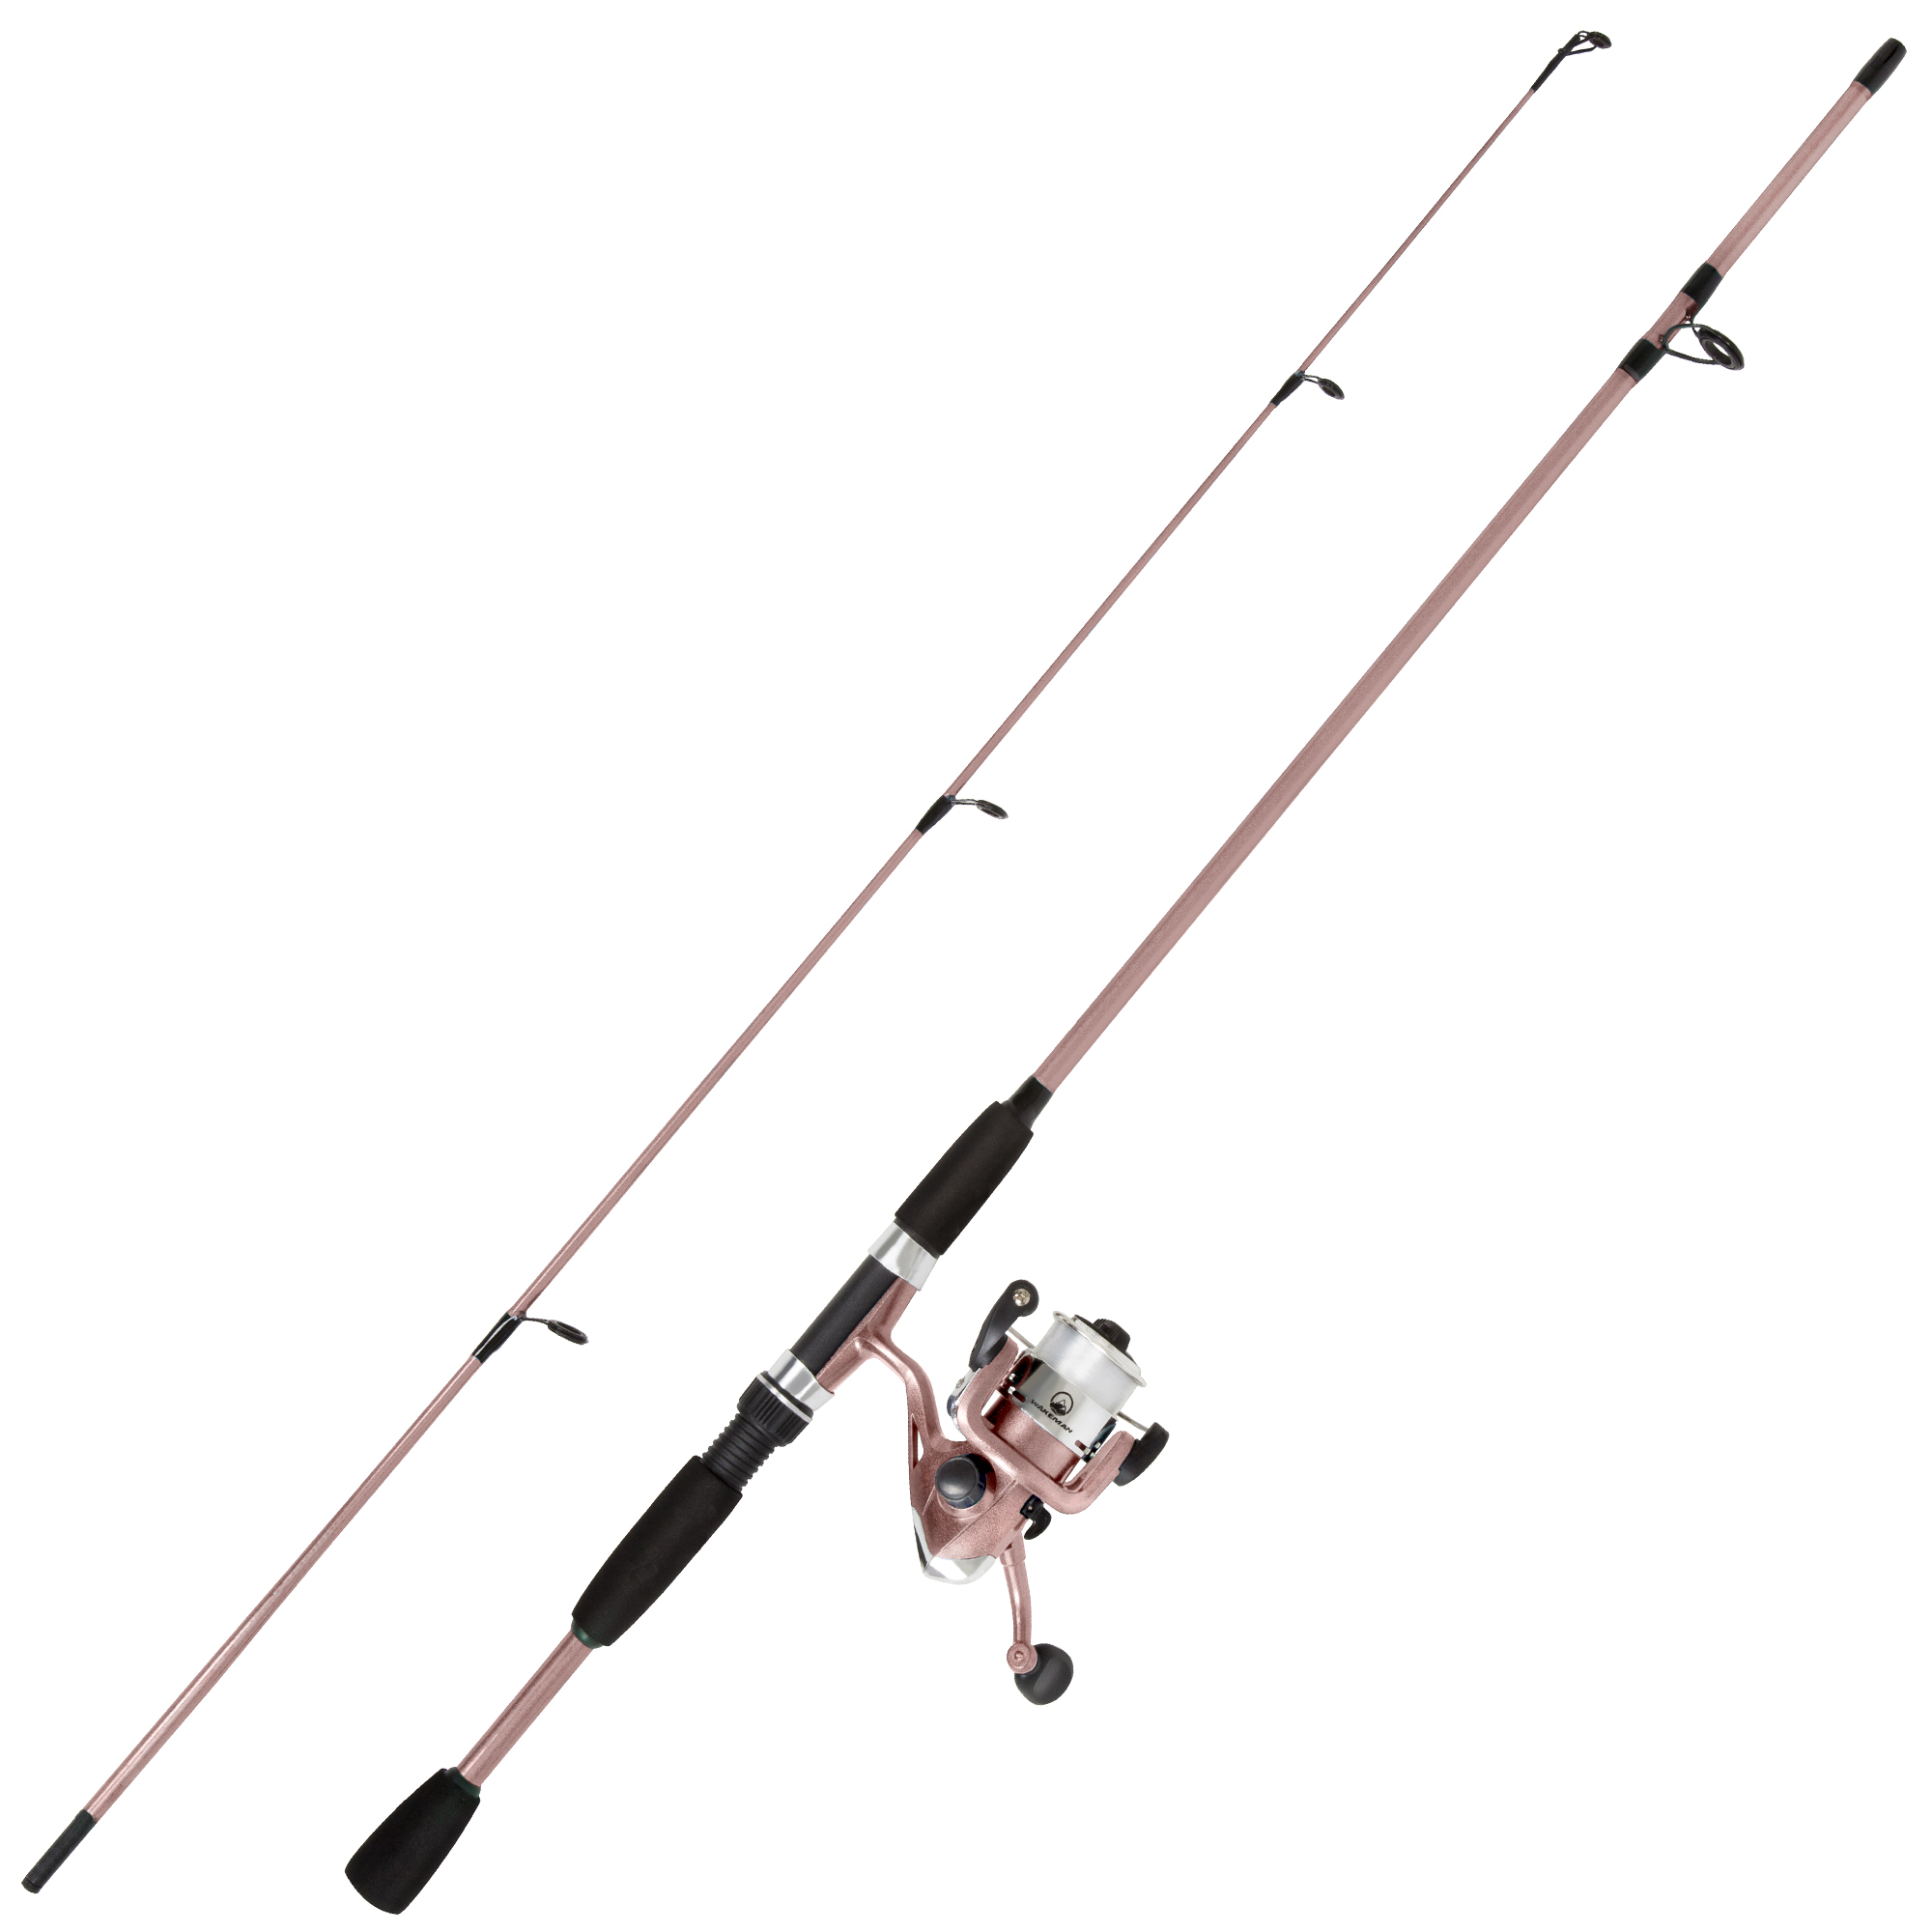 Fiberglass Fishing Rod Portable Telescopic Pole with Size 20 Spinning Reel Fishing Gear for Ponds, Lakes, and Rivers by Wakeman (Black)